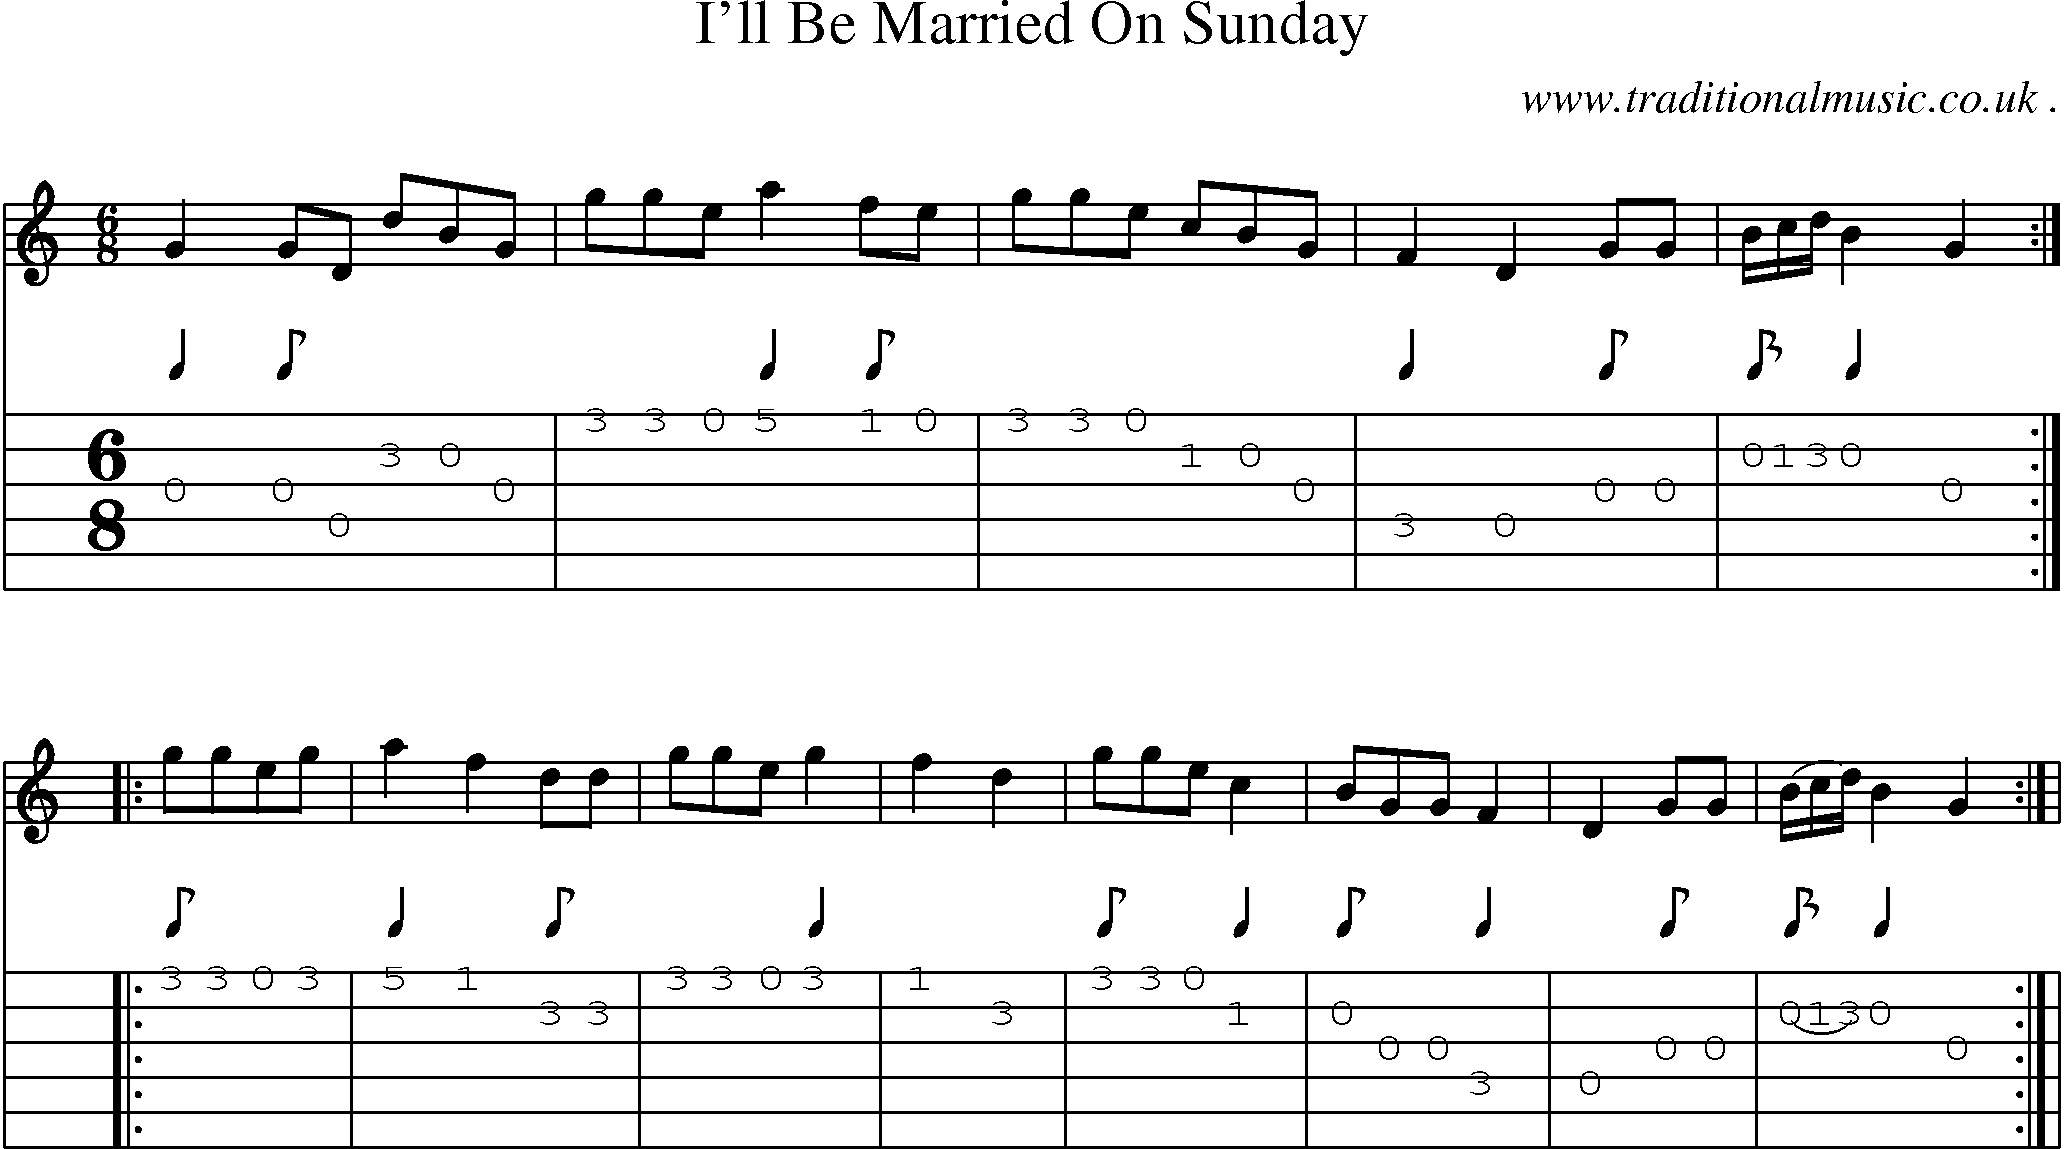 Sheet-Music and Guitar Tabs for Ill Be Married On Sunday